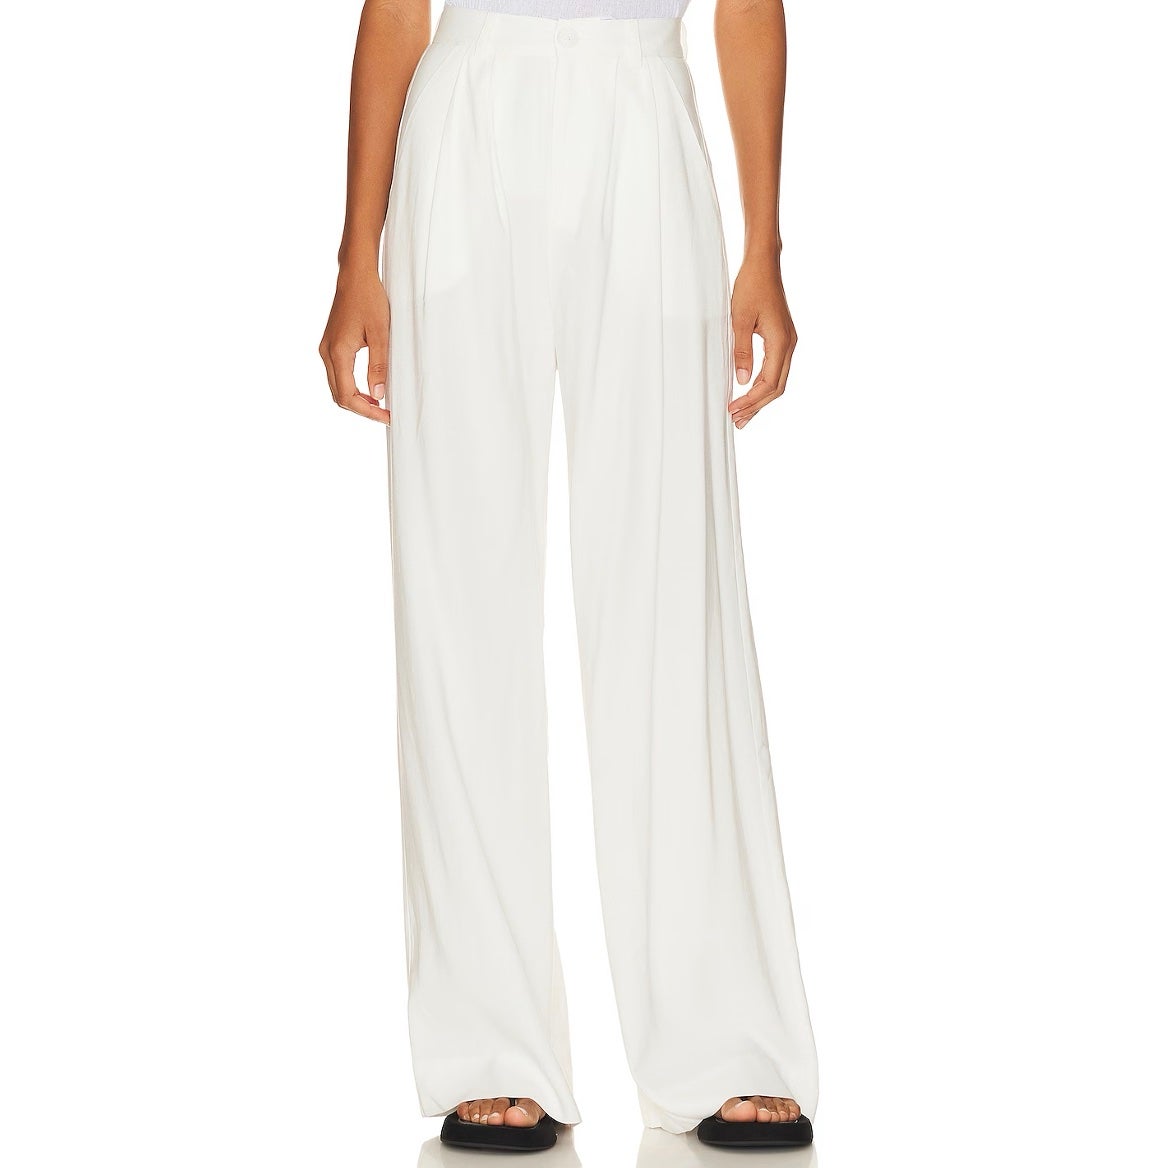 The Best Wide-Leg Pants for Women 2023: Sweatpants, Trousers and